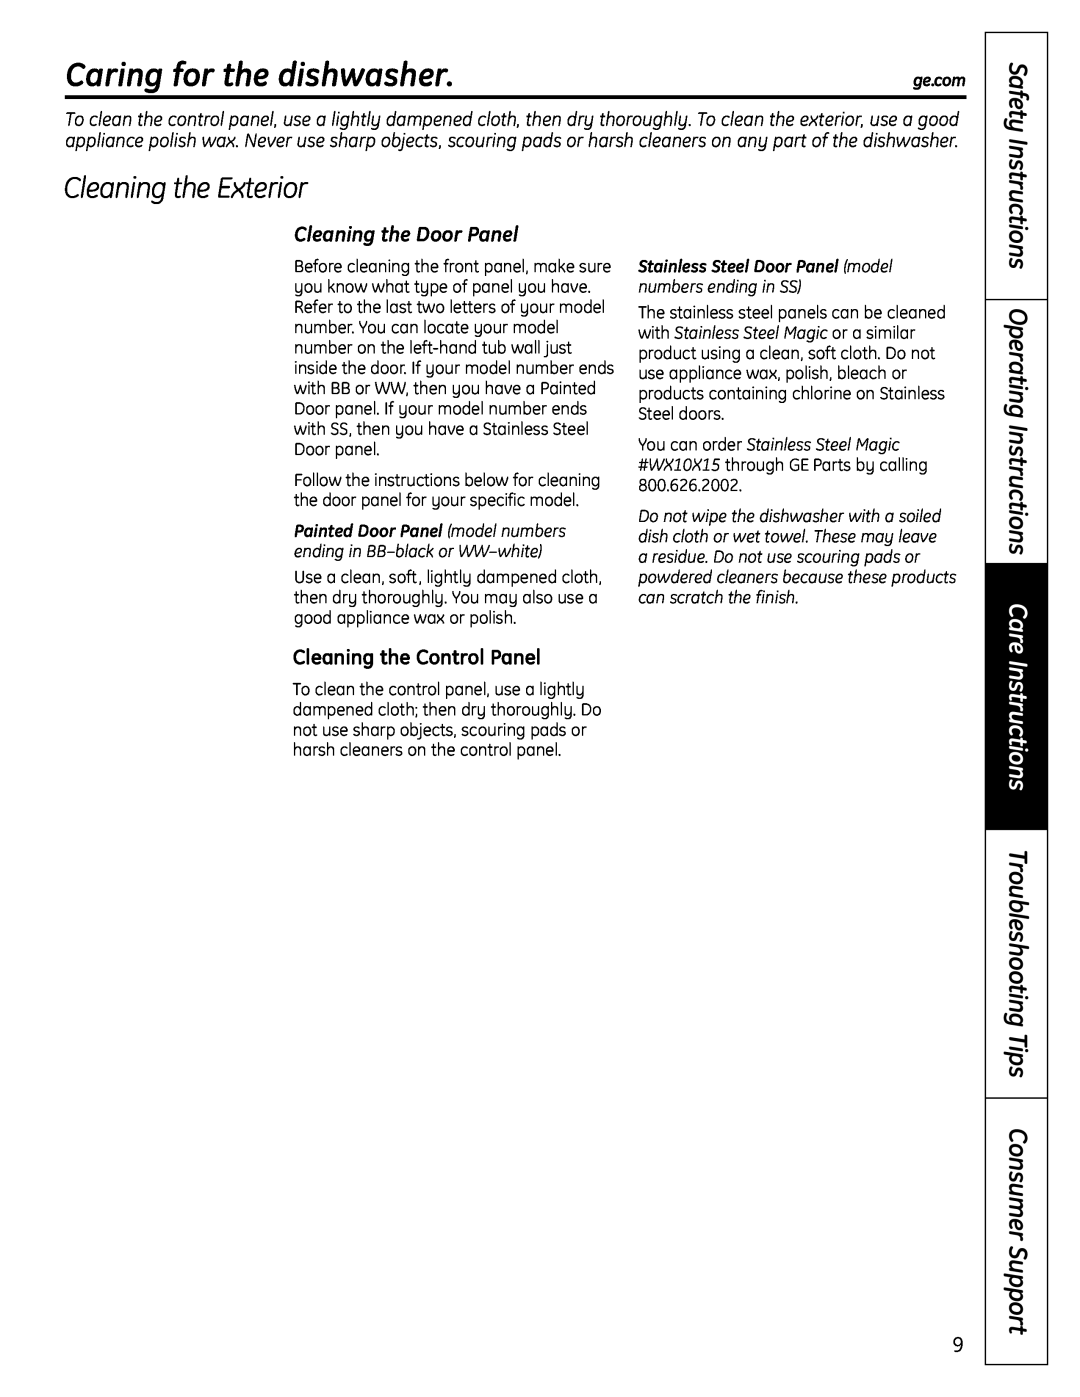 GE PDW1860 Series Caring for the dishwasher, Cleaning the Exterior, Instructions Troubleshooting Tips Consumer Support 